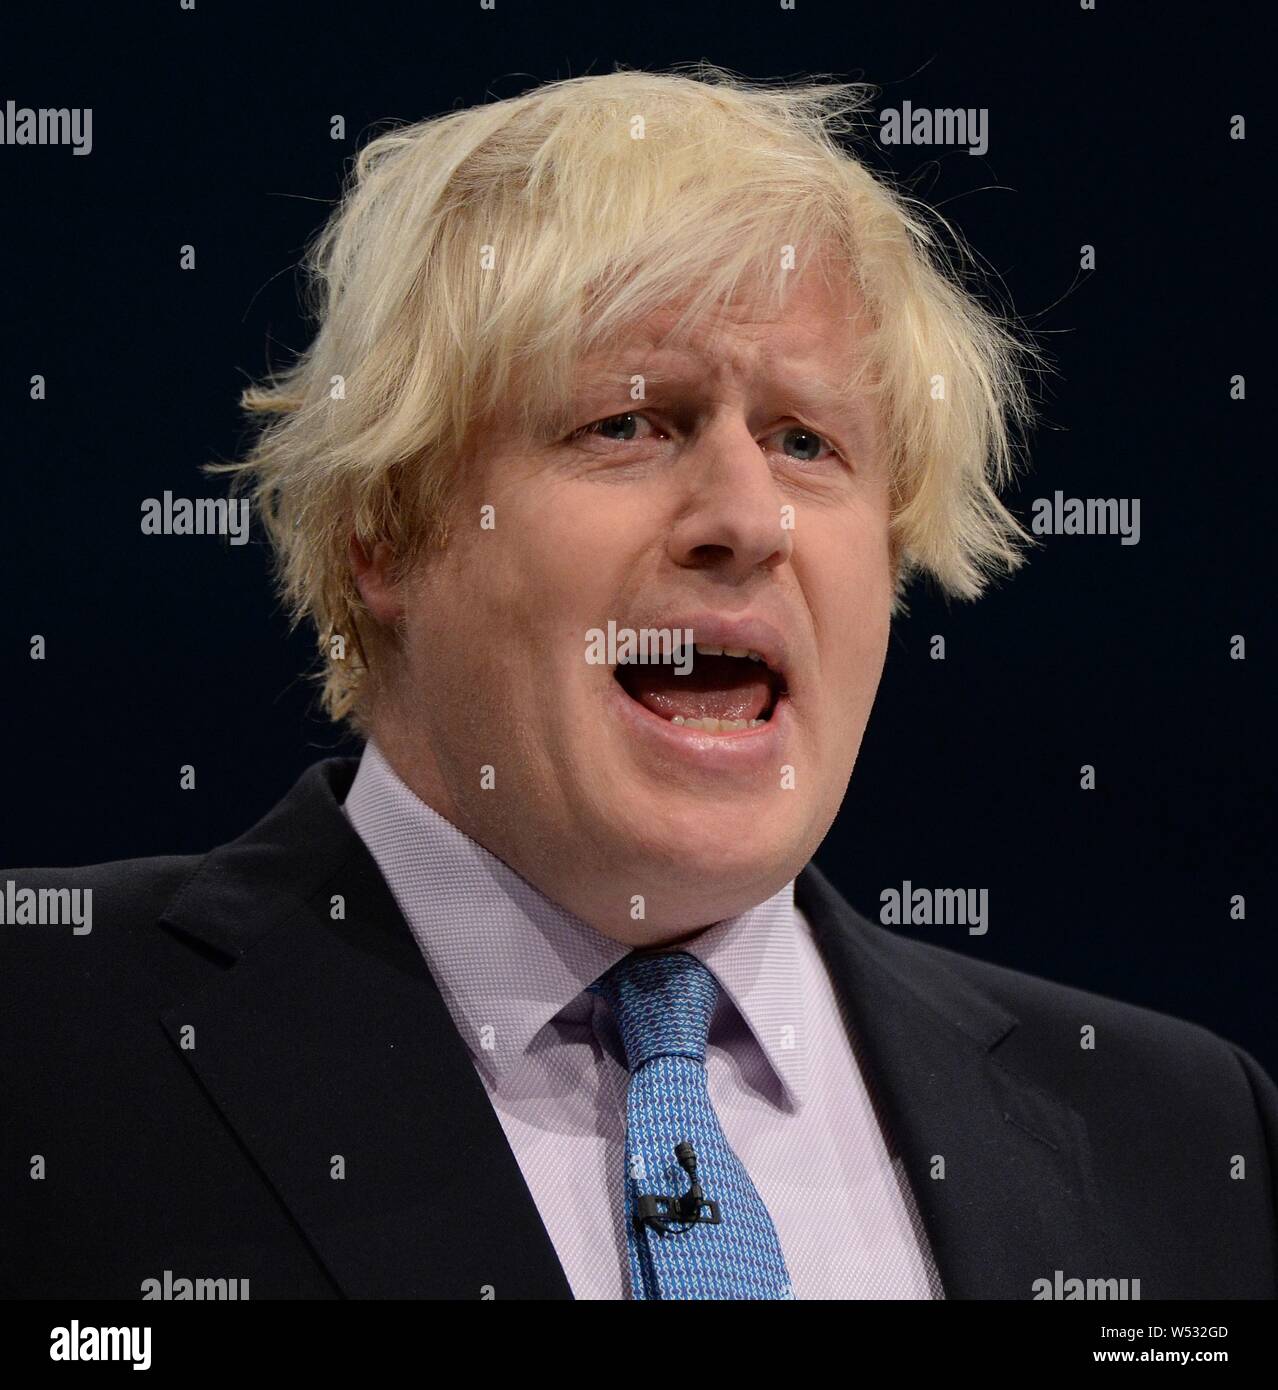 Boris Johnson, the Mayor of London, delivers his speech in the Main Hall of Manchester Central on the third day, and penultimate day, of the Conservative Party Conference on October 1, 2013 in Manchester, England. Stock Photo